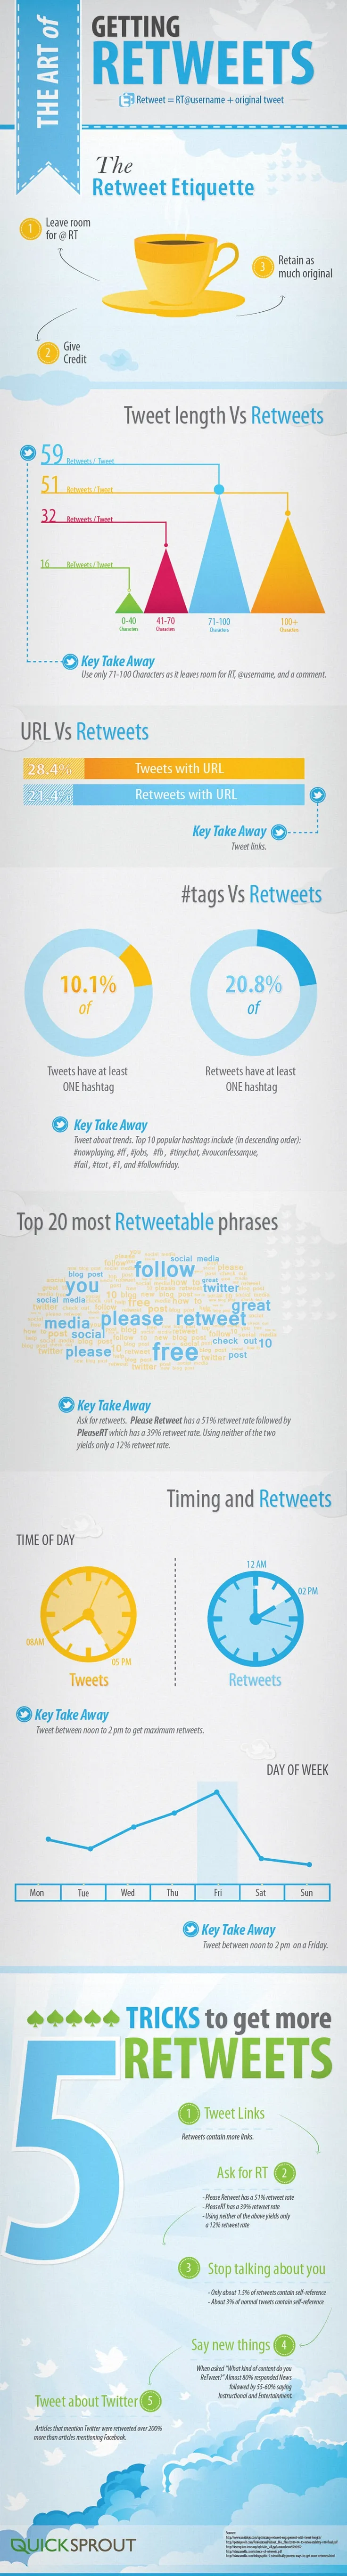 infographic the art of getting retweets